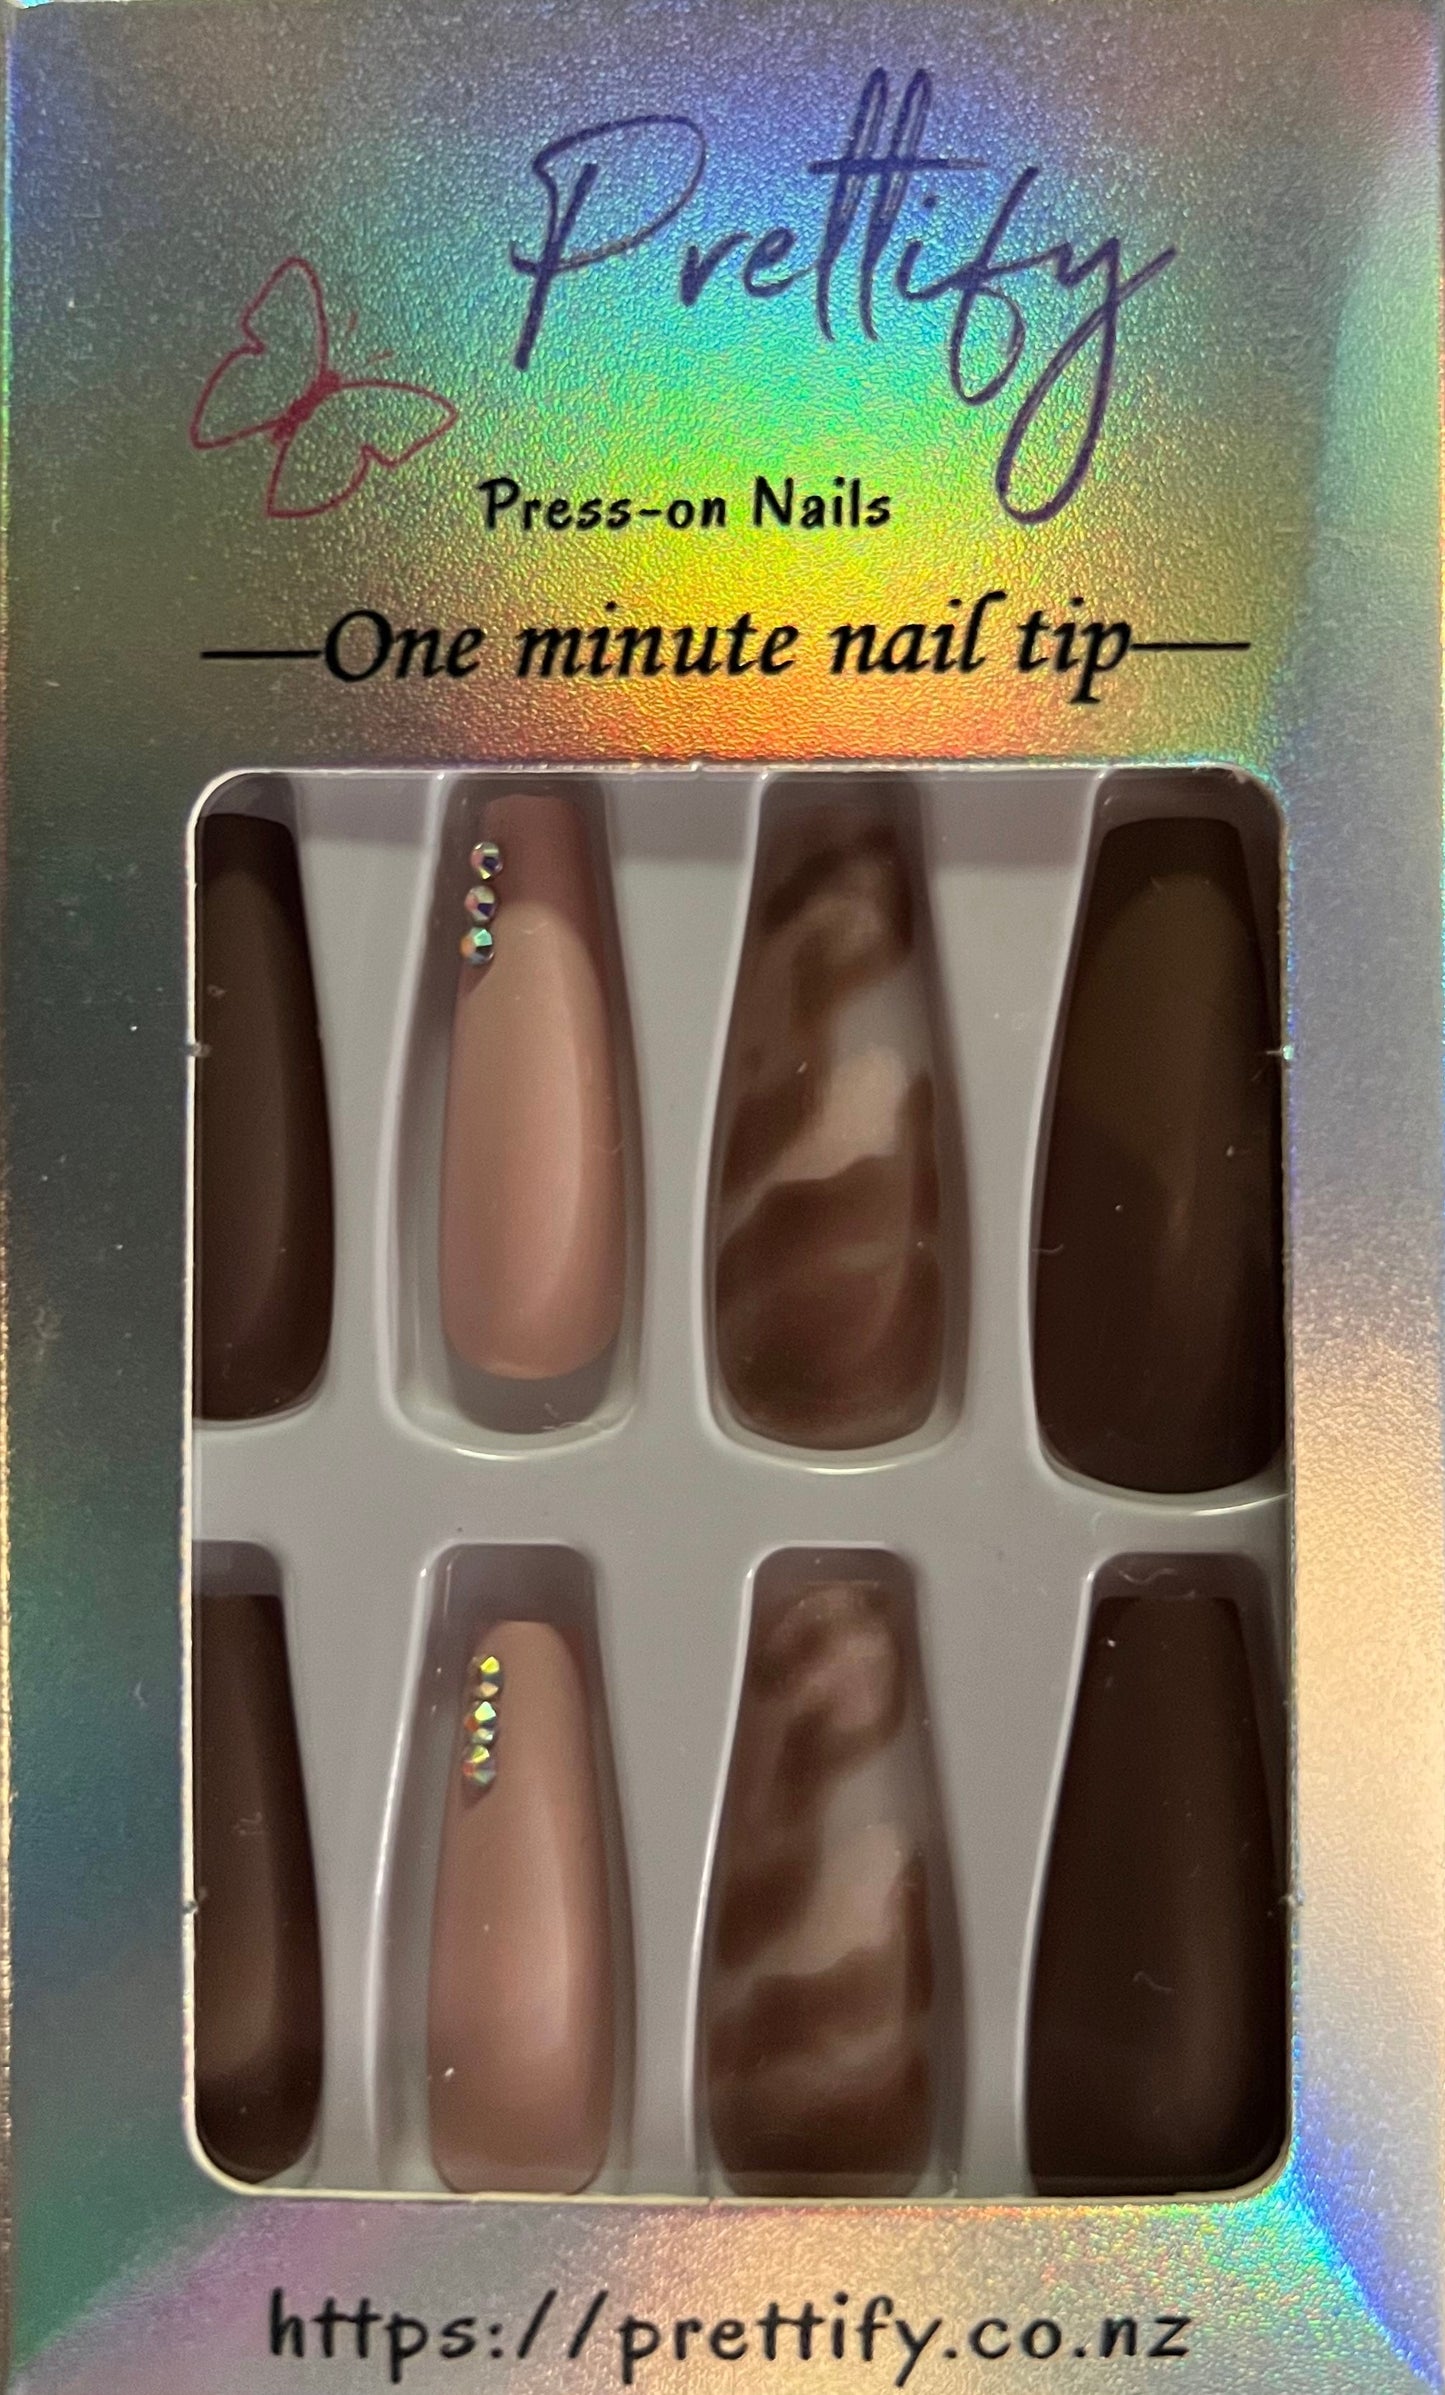 Cocoa, Pink & Marble with Jewels - Coffin Press on Nails. 24pcs.